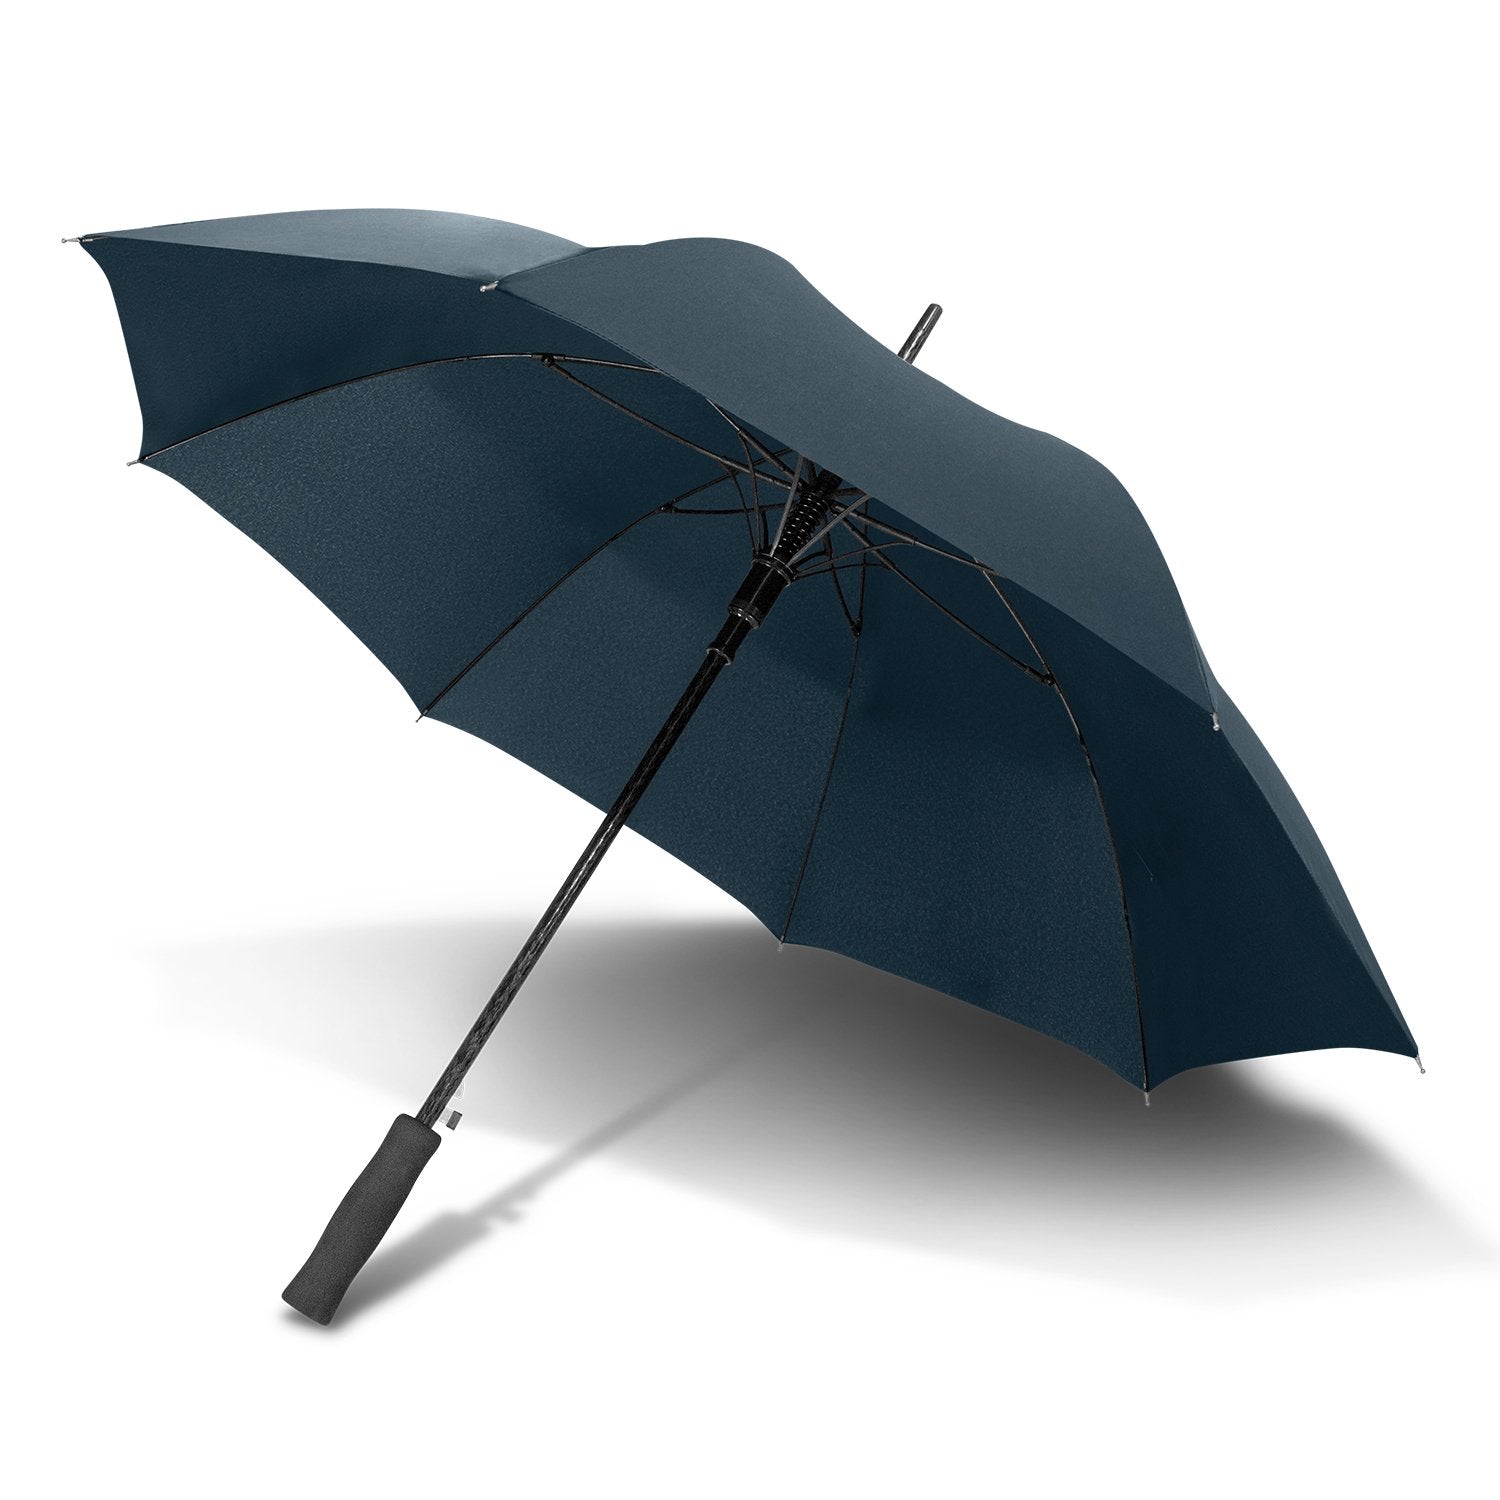 STORMPROOF ULTIMATE®️ Heavy Duty Personal Umbrella With Windproof Fibreglass Frame and Fibreglass Shaft - Premium Automatic Opening